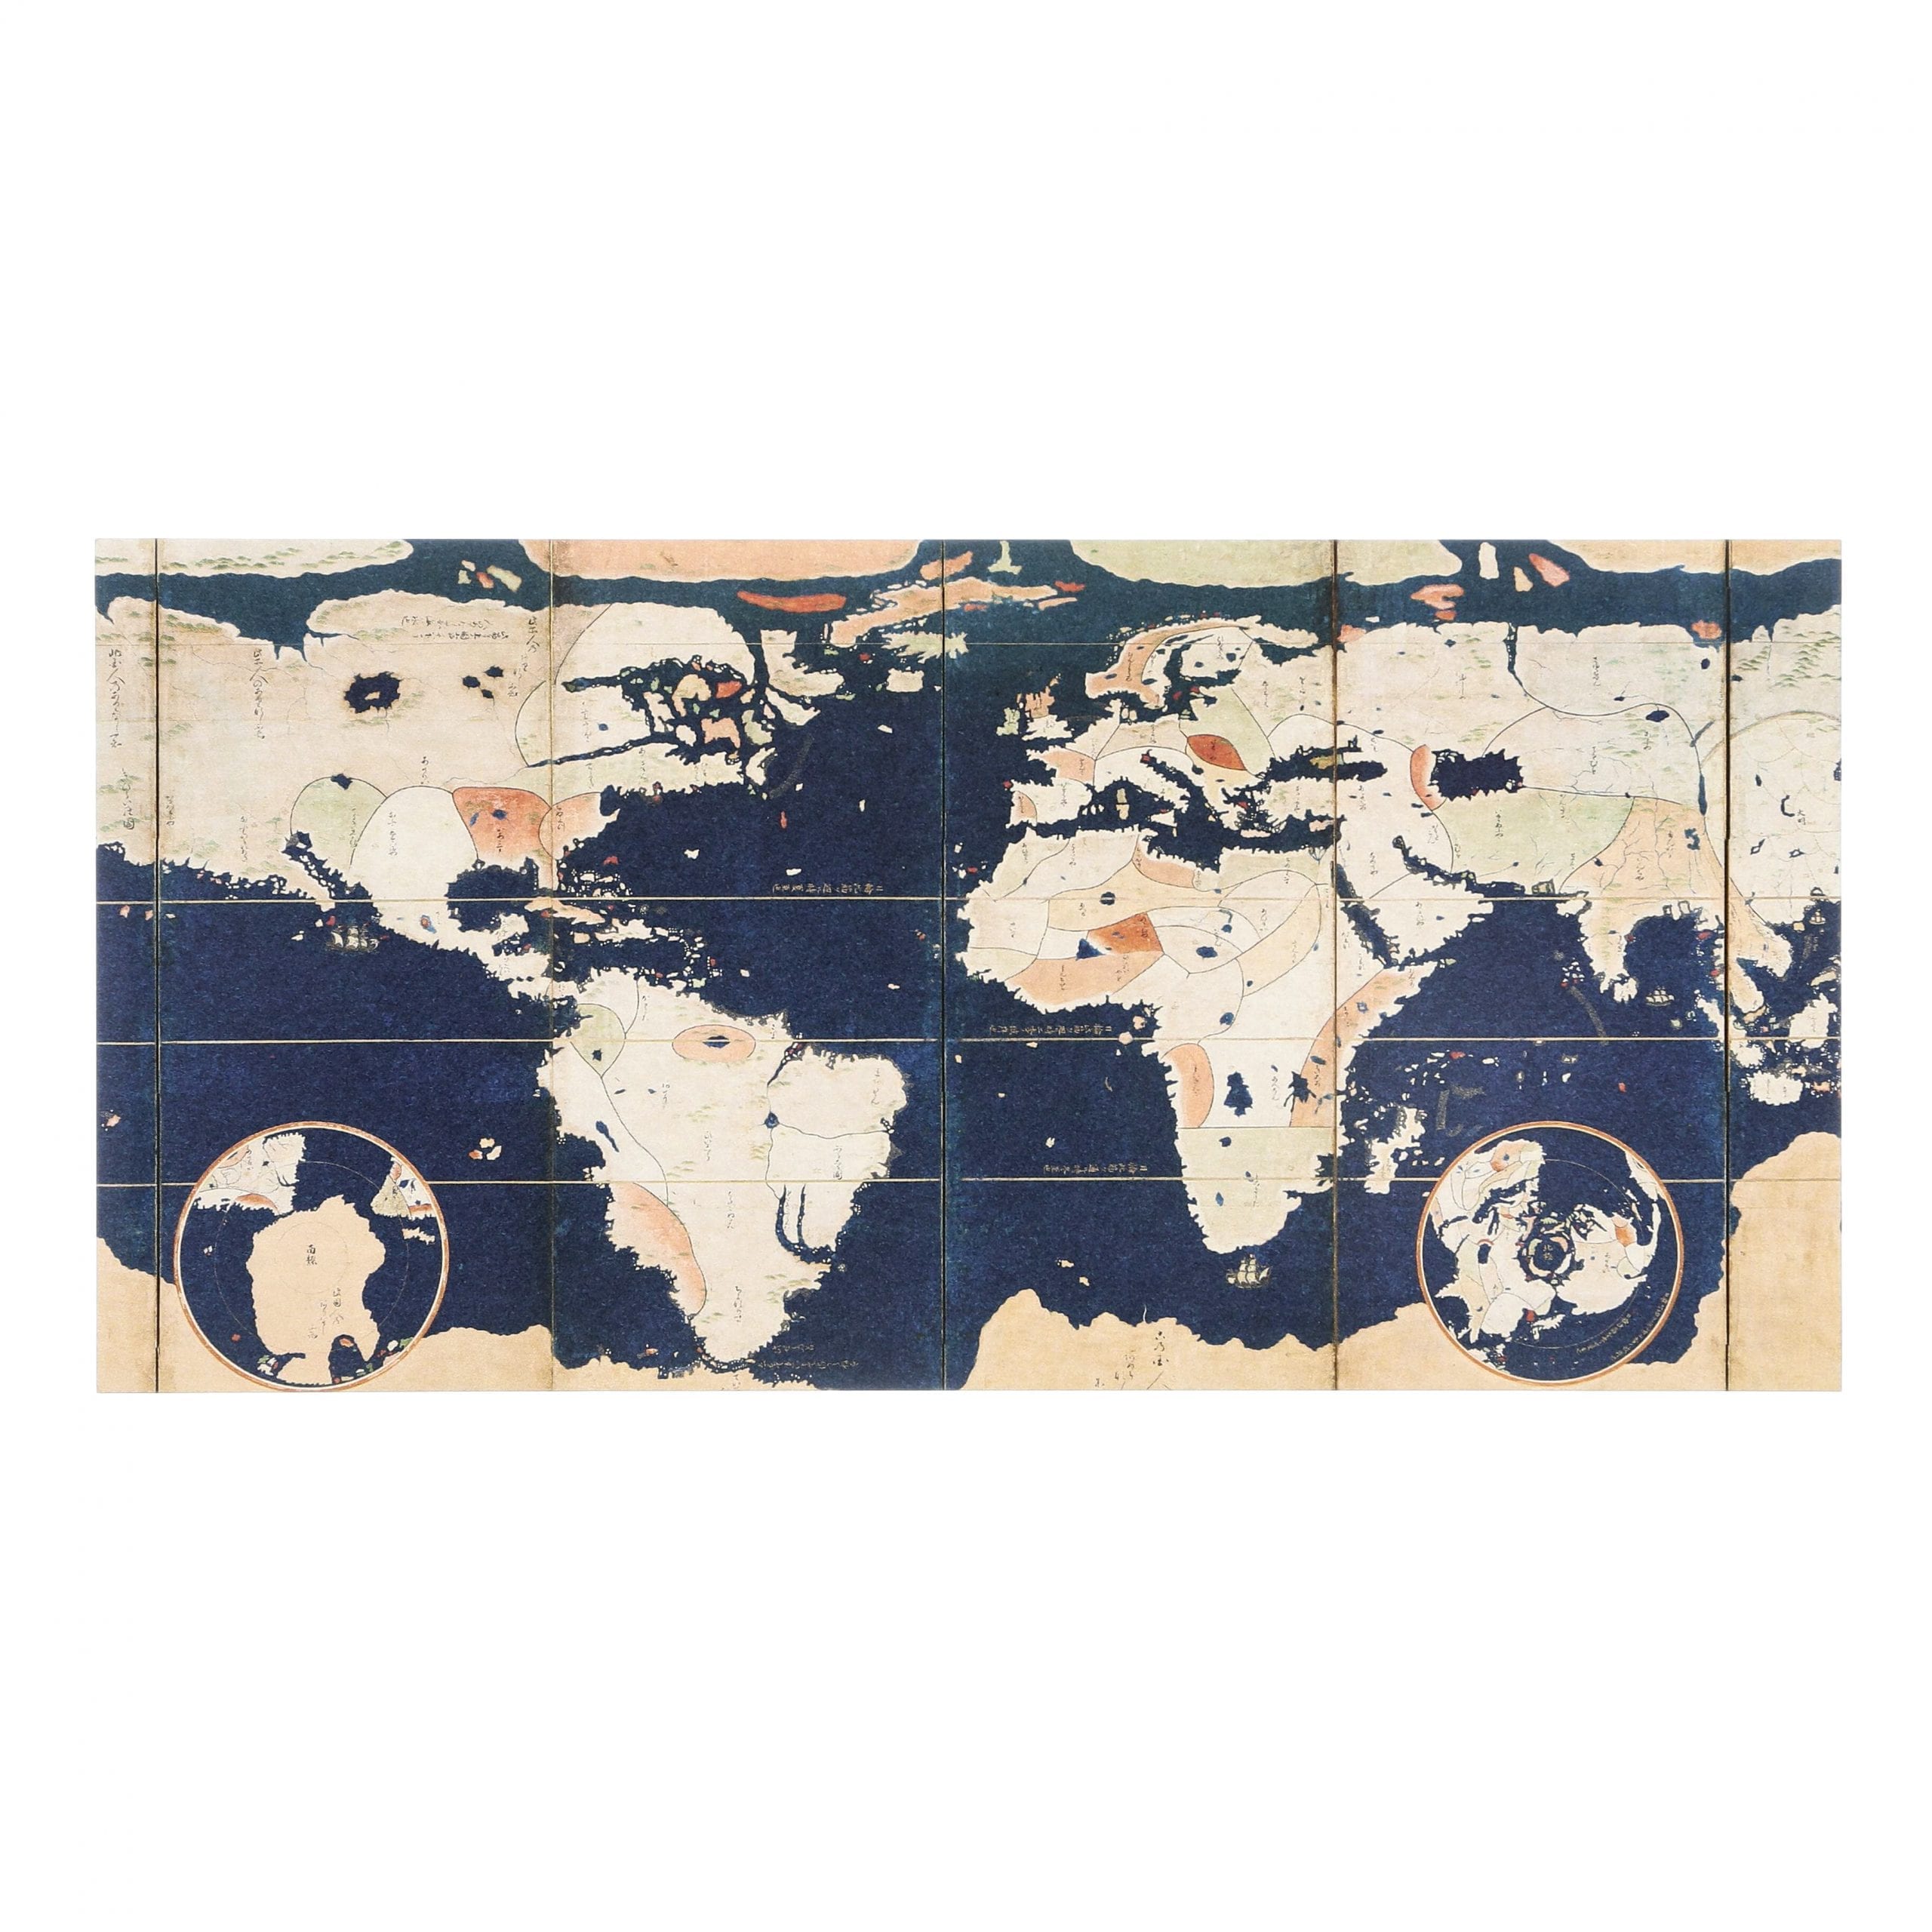 Postcard Pair of Namban screens with maps of the world and Japan